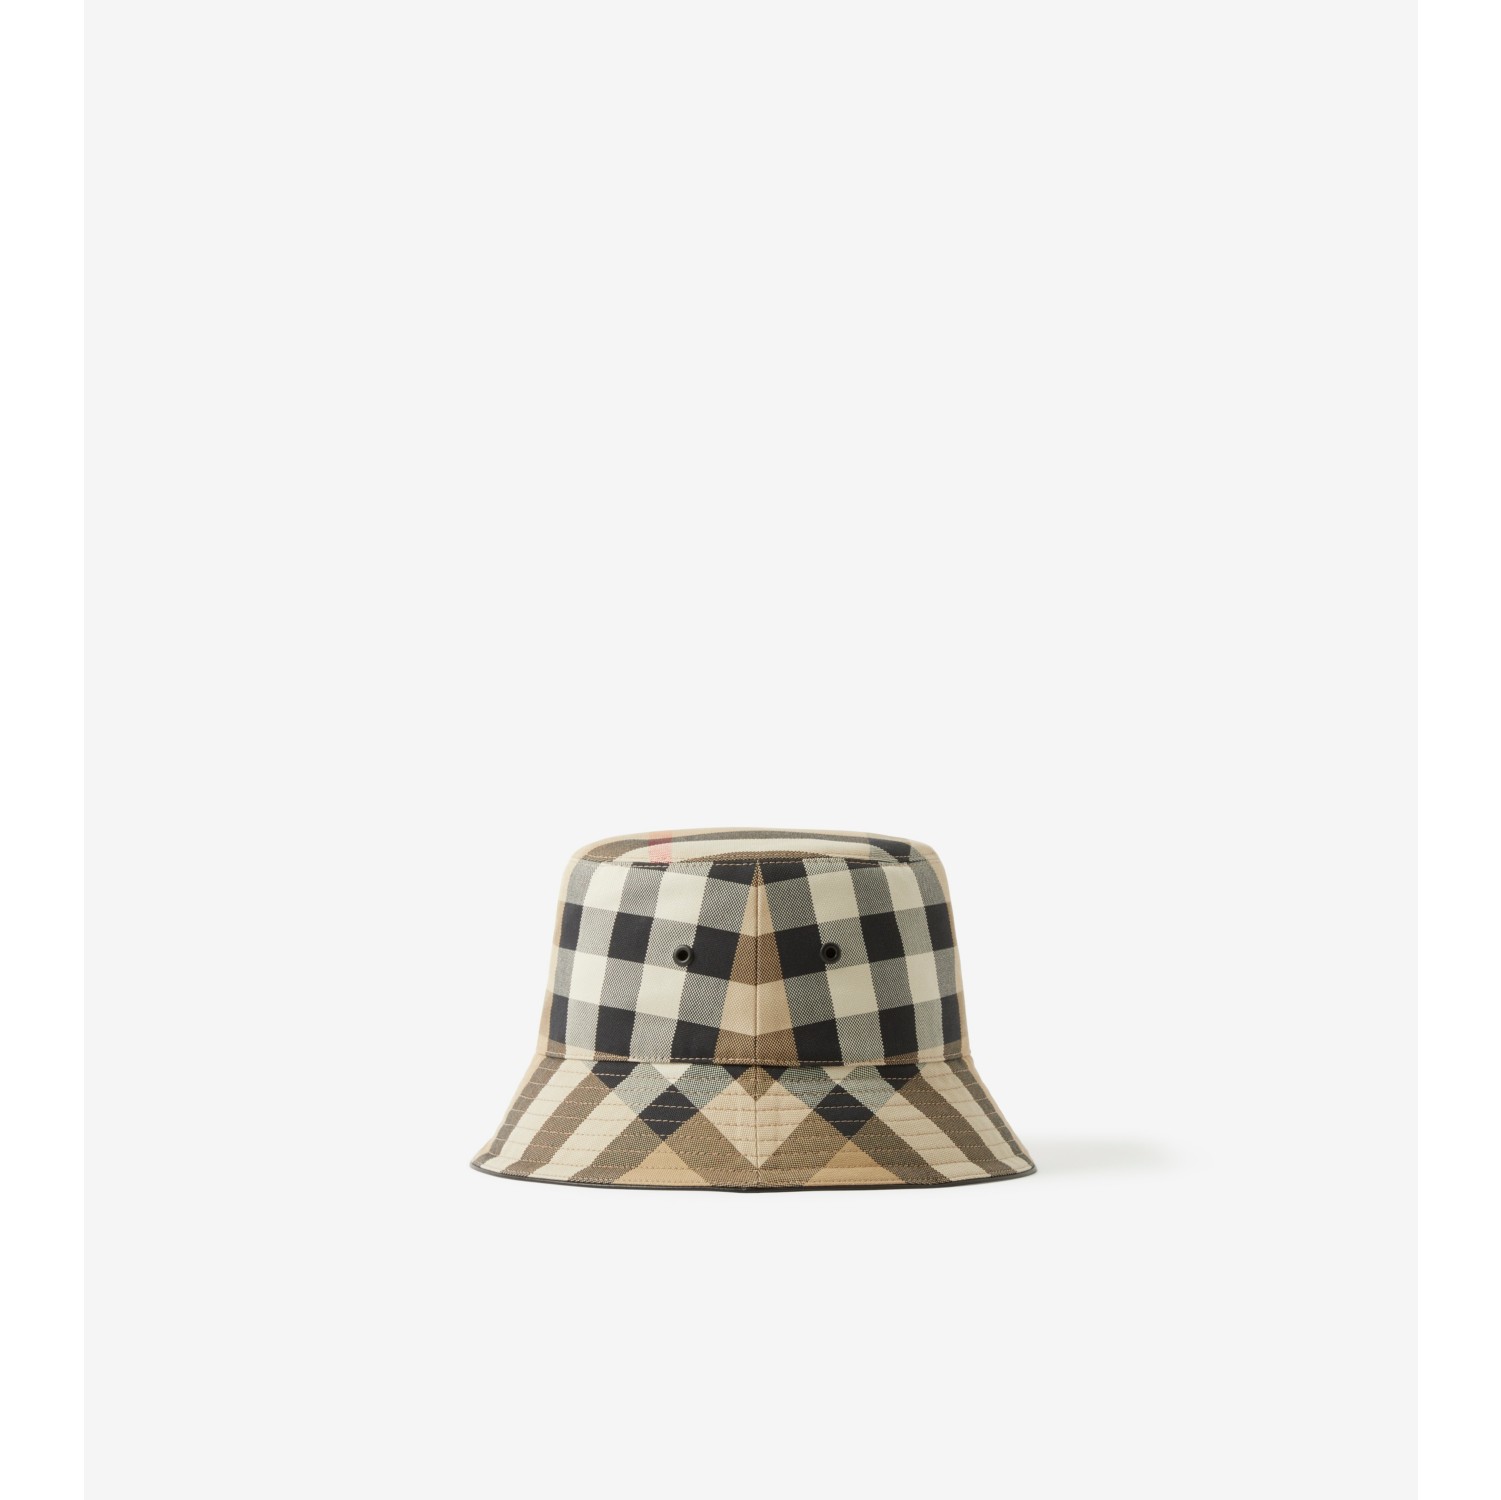 BURBERRY Technical Cotton Giant Check Globe Bucket Hat M Soft Fawn 1301020